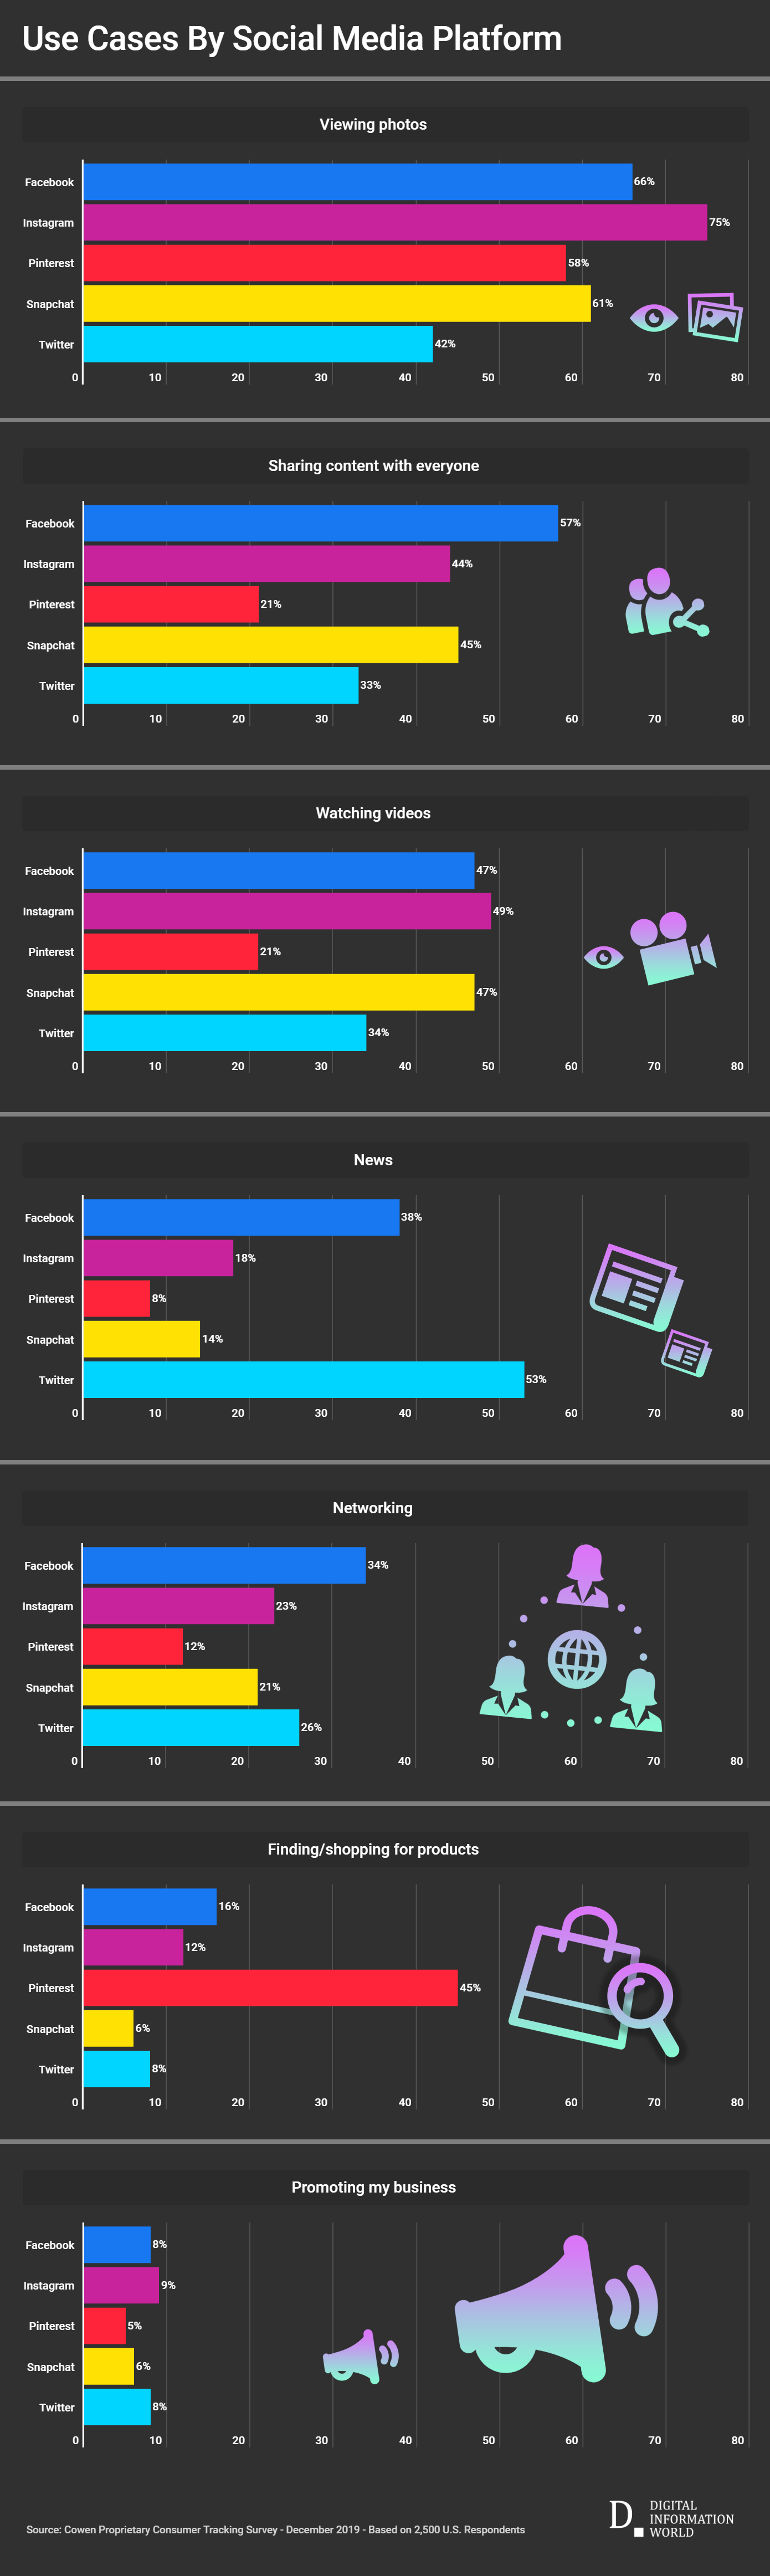 Use Cases by Social Media Platform - infographic